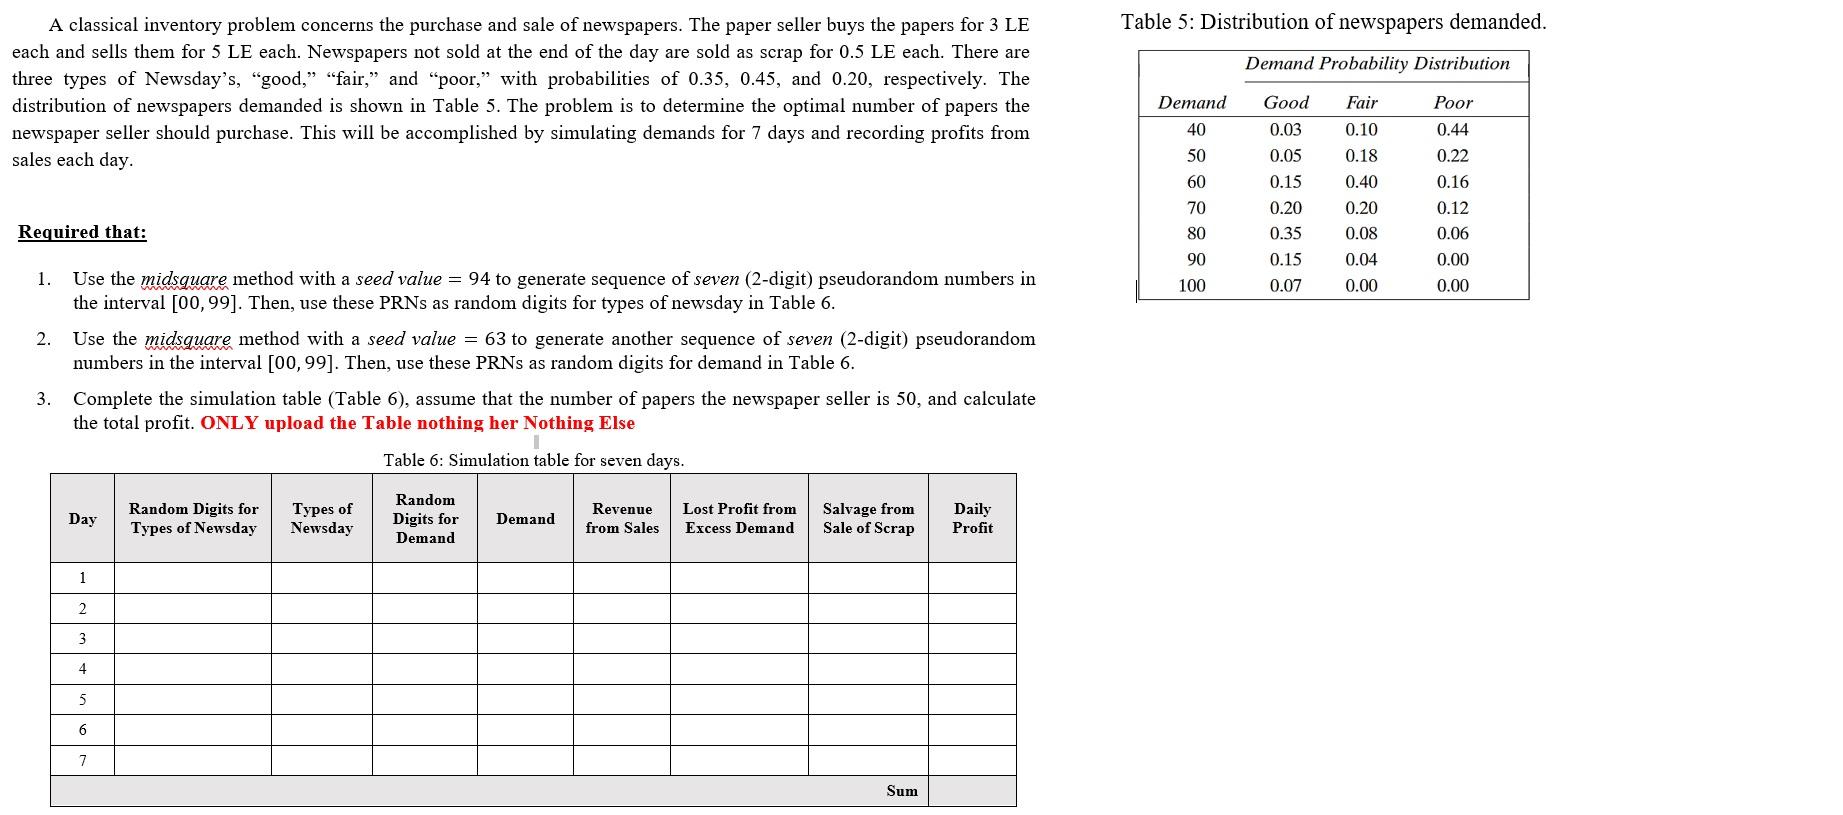 Table 5 Distribution Of Newspapers Demanded Demand Probability Distribution A Classical Inventory Problem Concerns The 1